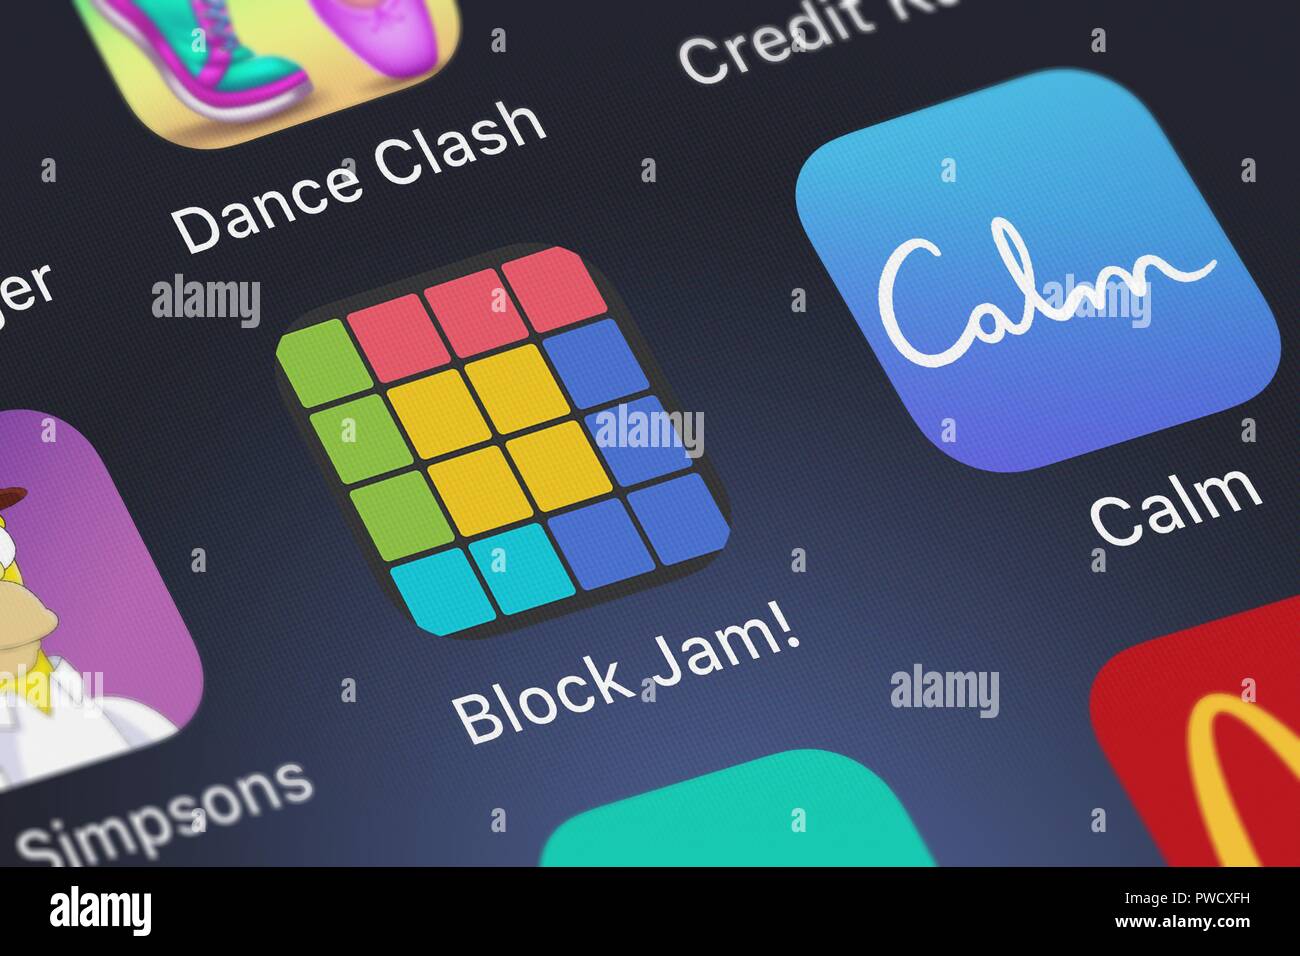 Bloxorz: Roll the Block for iOS